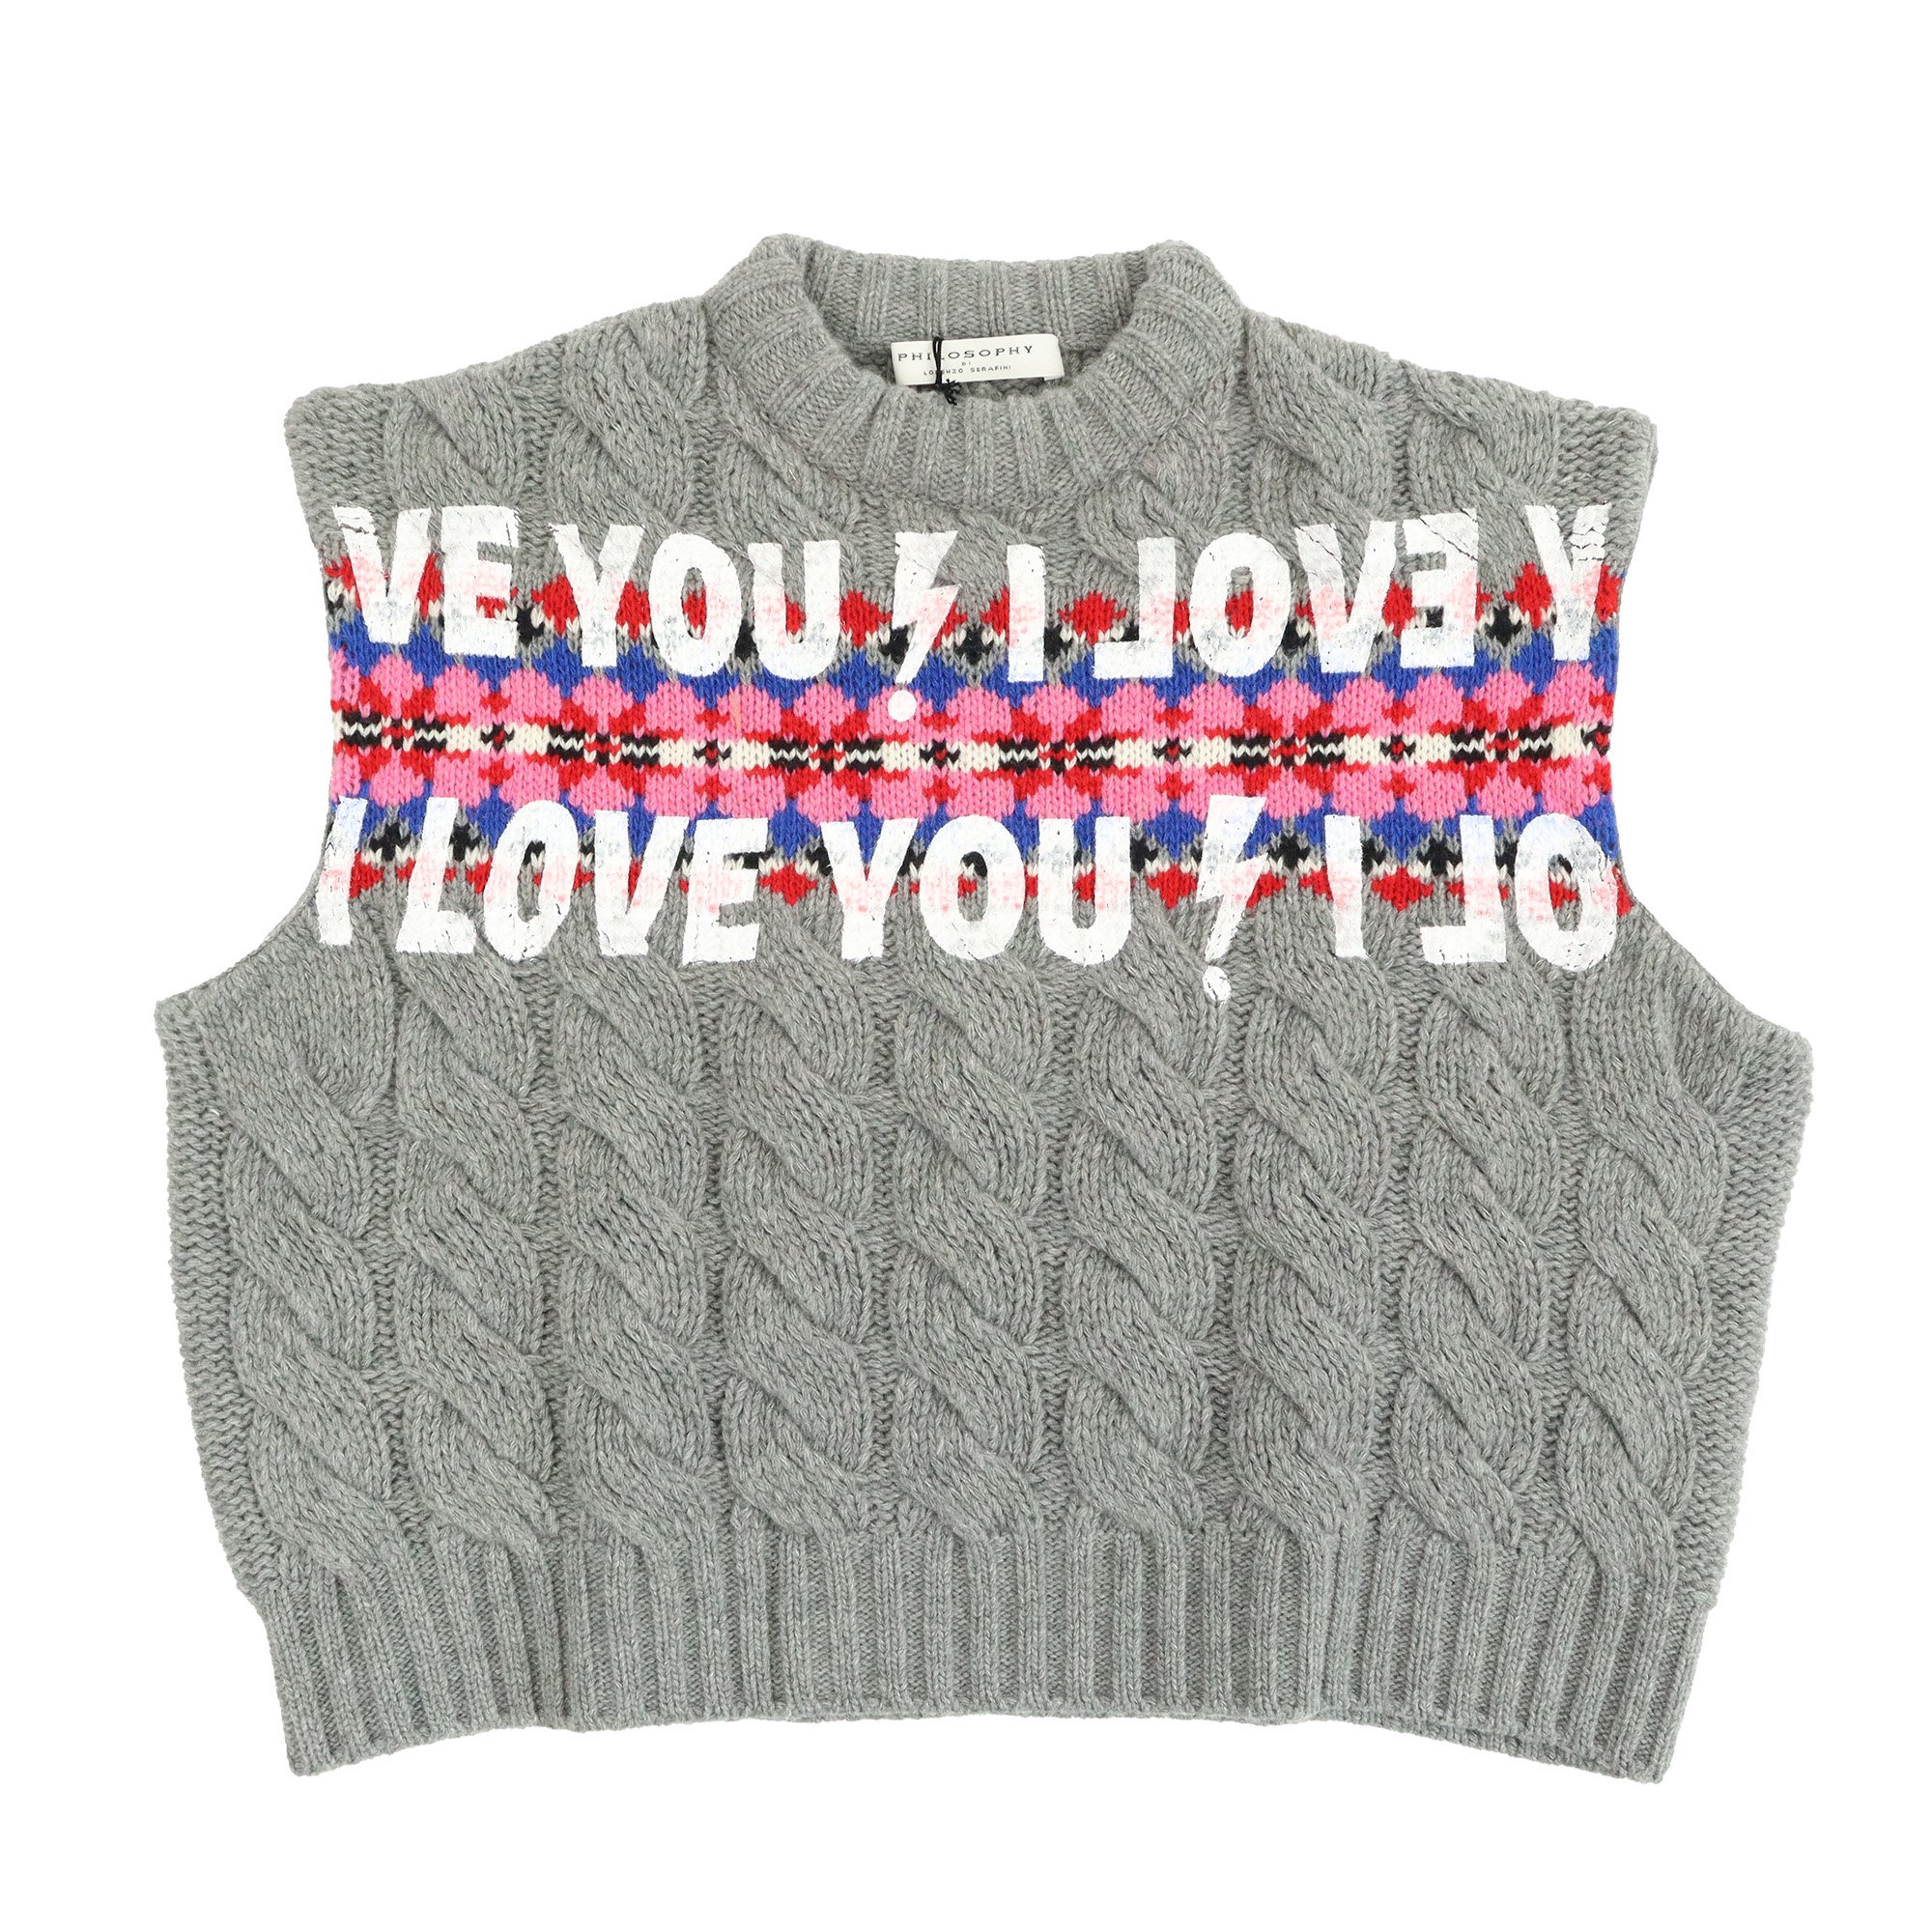 <img class='new_mark_img1' src='https://img.shop-pro.jp/img/new/icons47.gif' style='border:none;display:inline;margin:0px;padding:0px;width:auto;' />PHILOSOPHY KNIT VEST